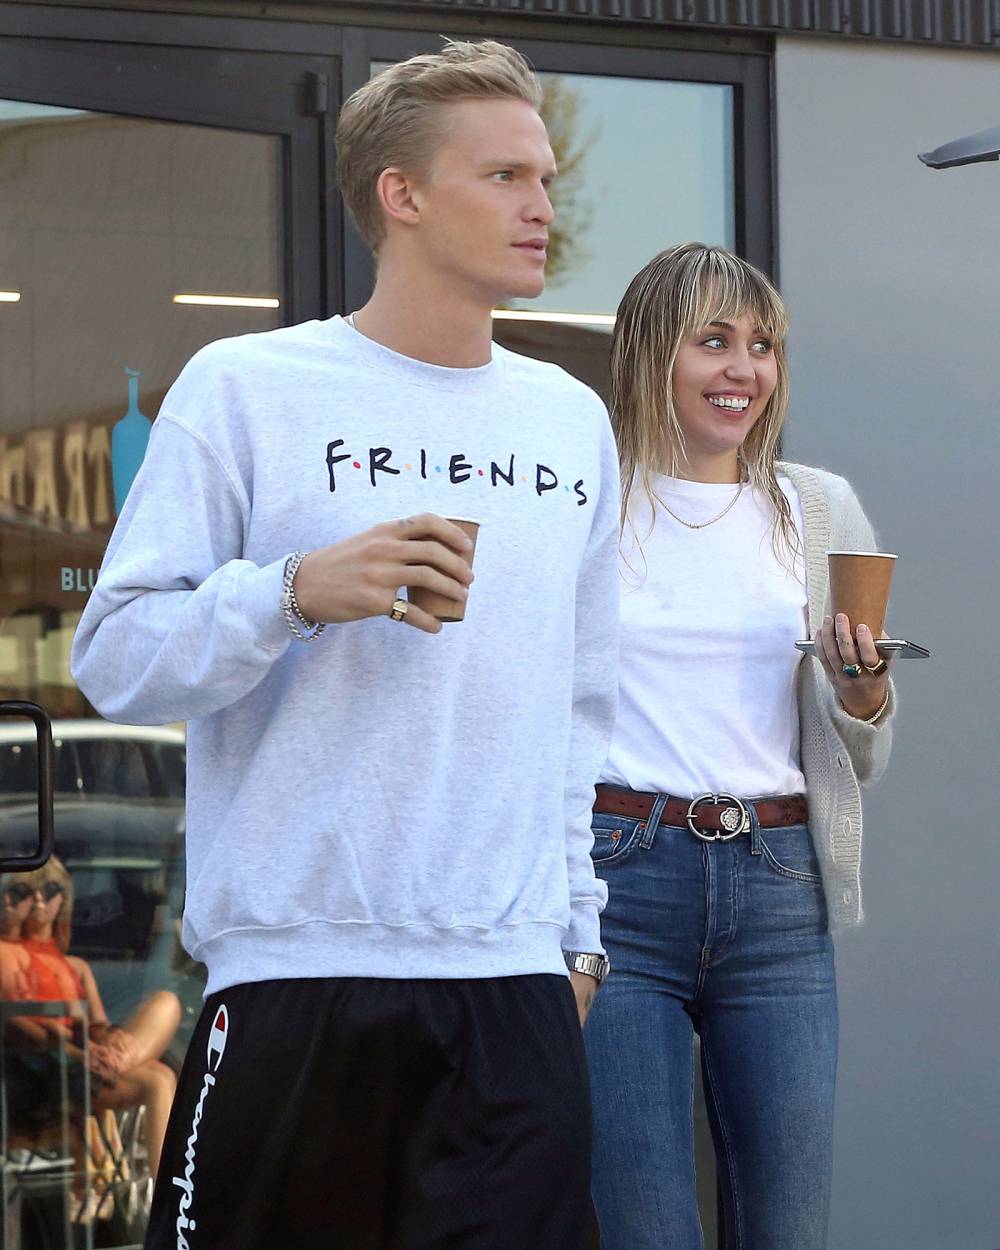 Miley Cyrus Confirms She Is Still 'Dating' Cody Simpson After Split Rumors